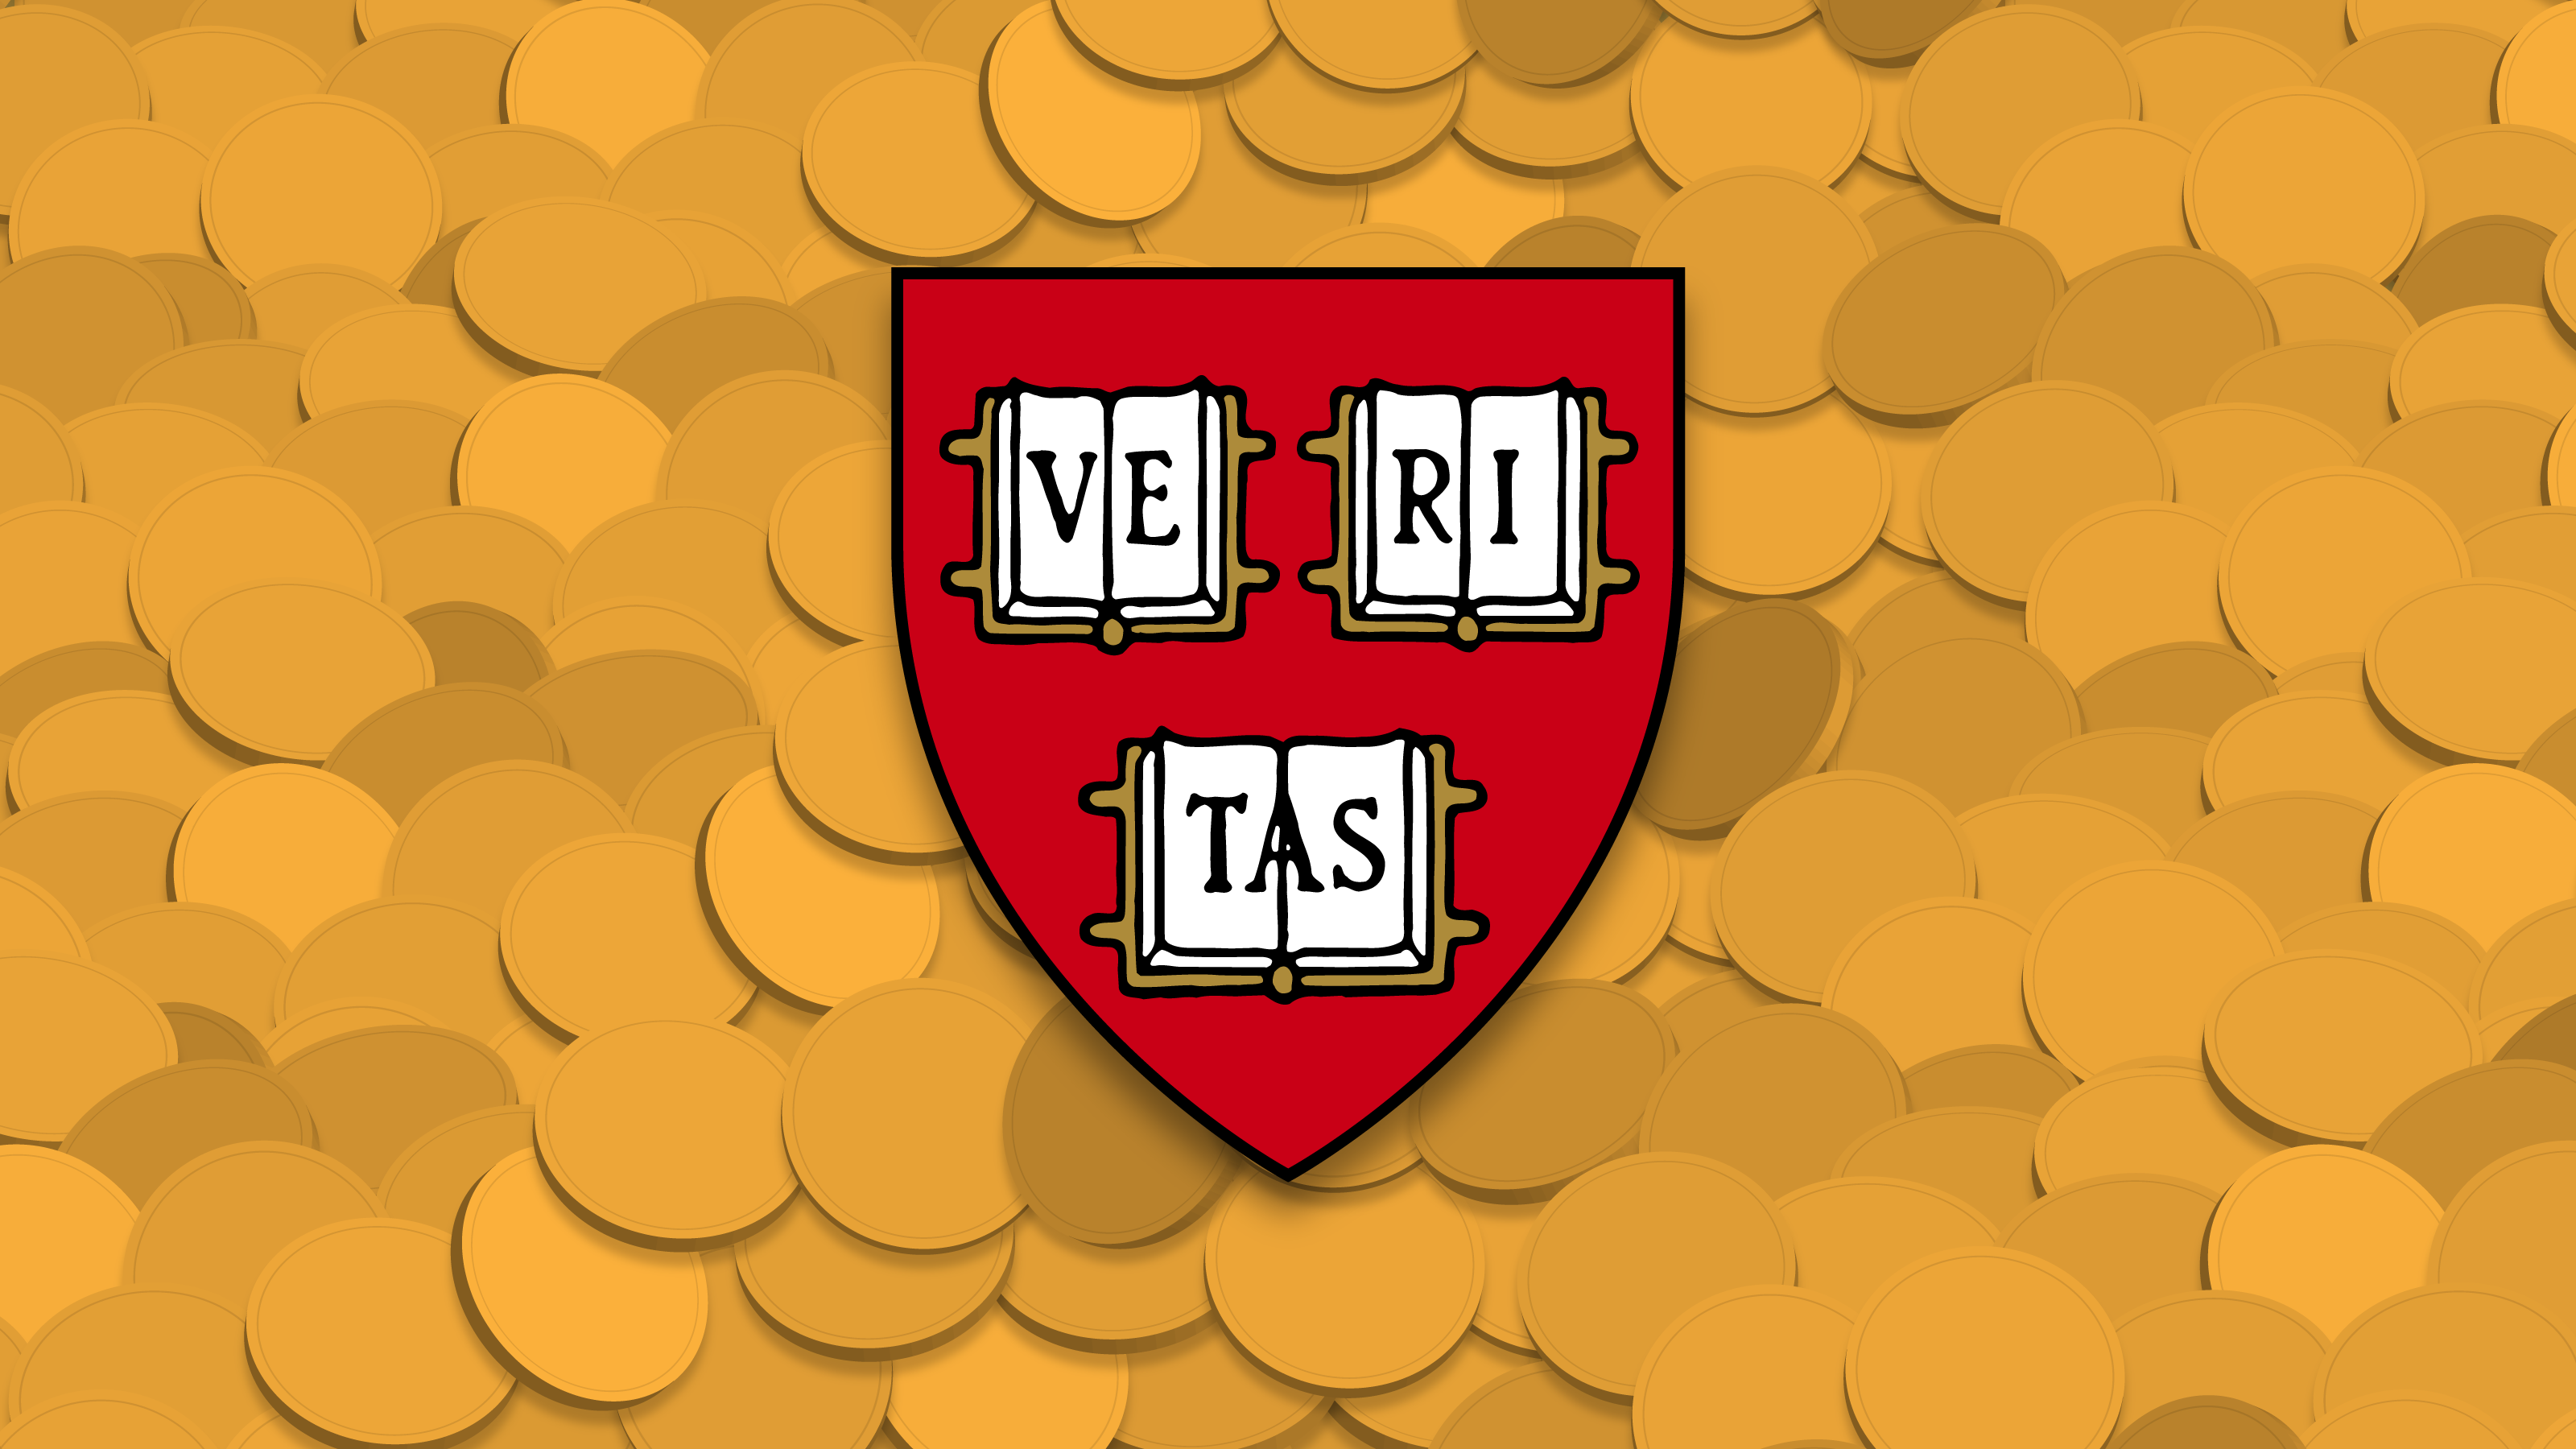 Need a post on Harvard.edu about your ICO? $500, please